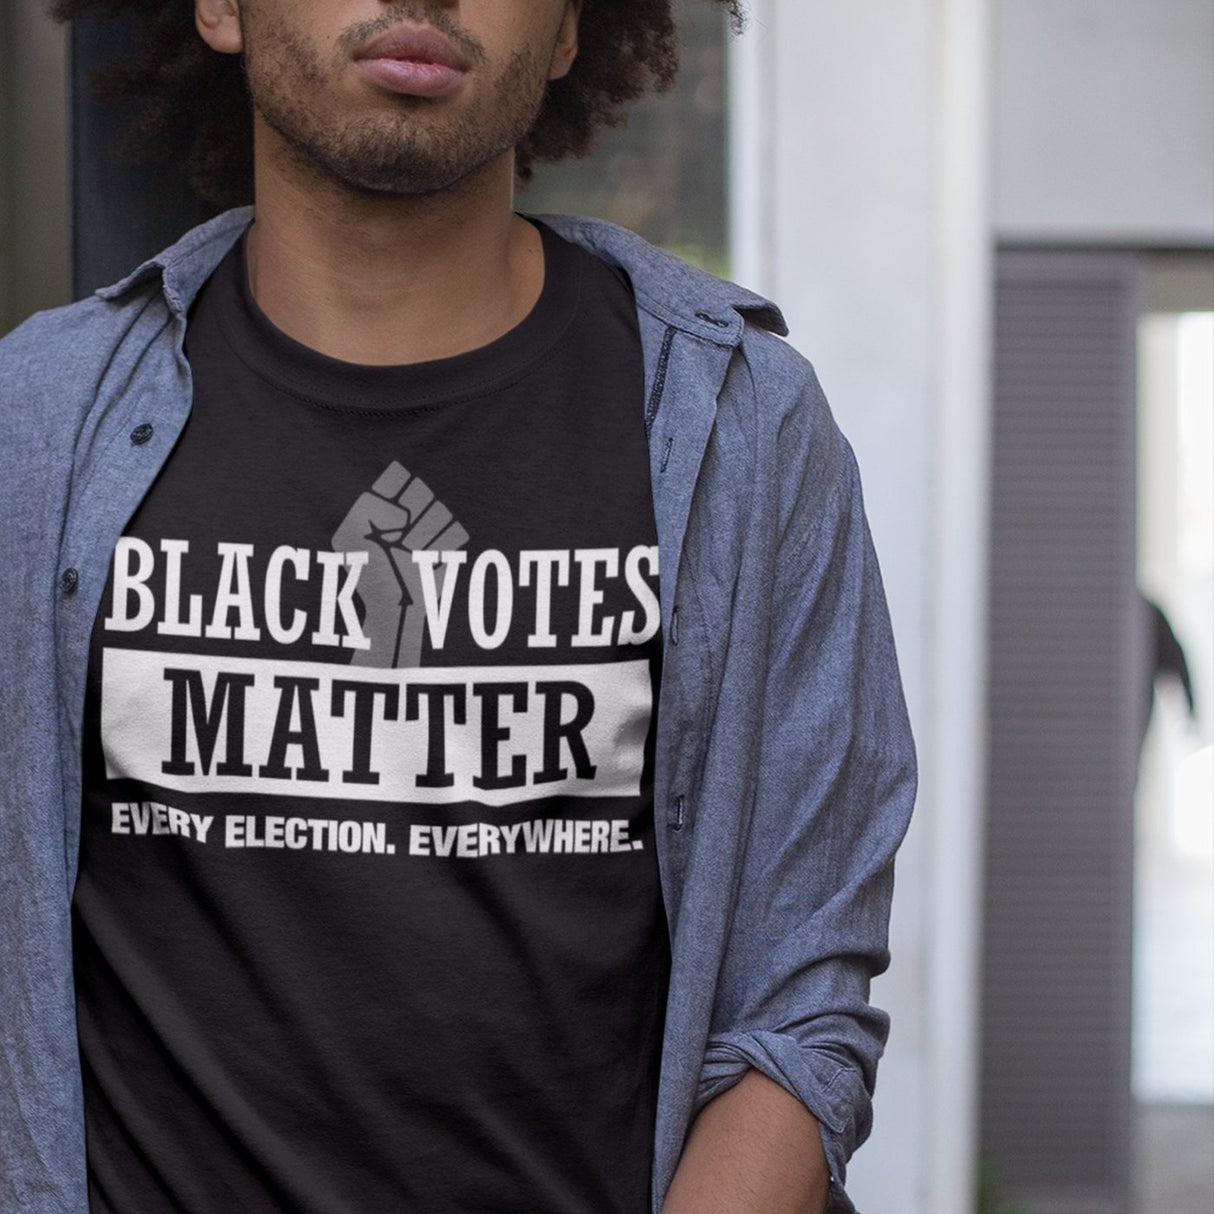 black-votes-matter-every-election-everywhere-black-tee-votes-t-shirt-matter-tee-t-shirt-tee#color_black